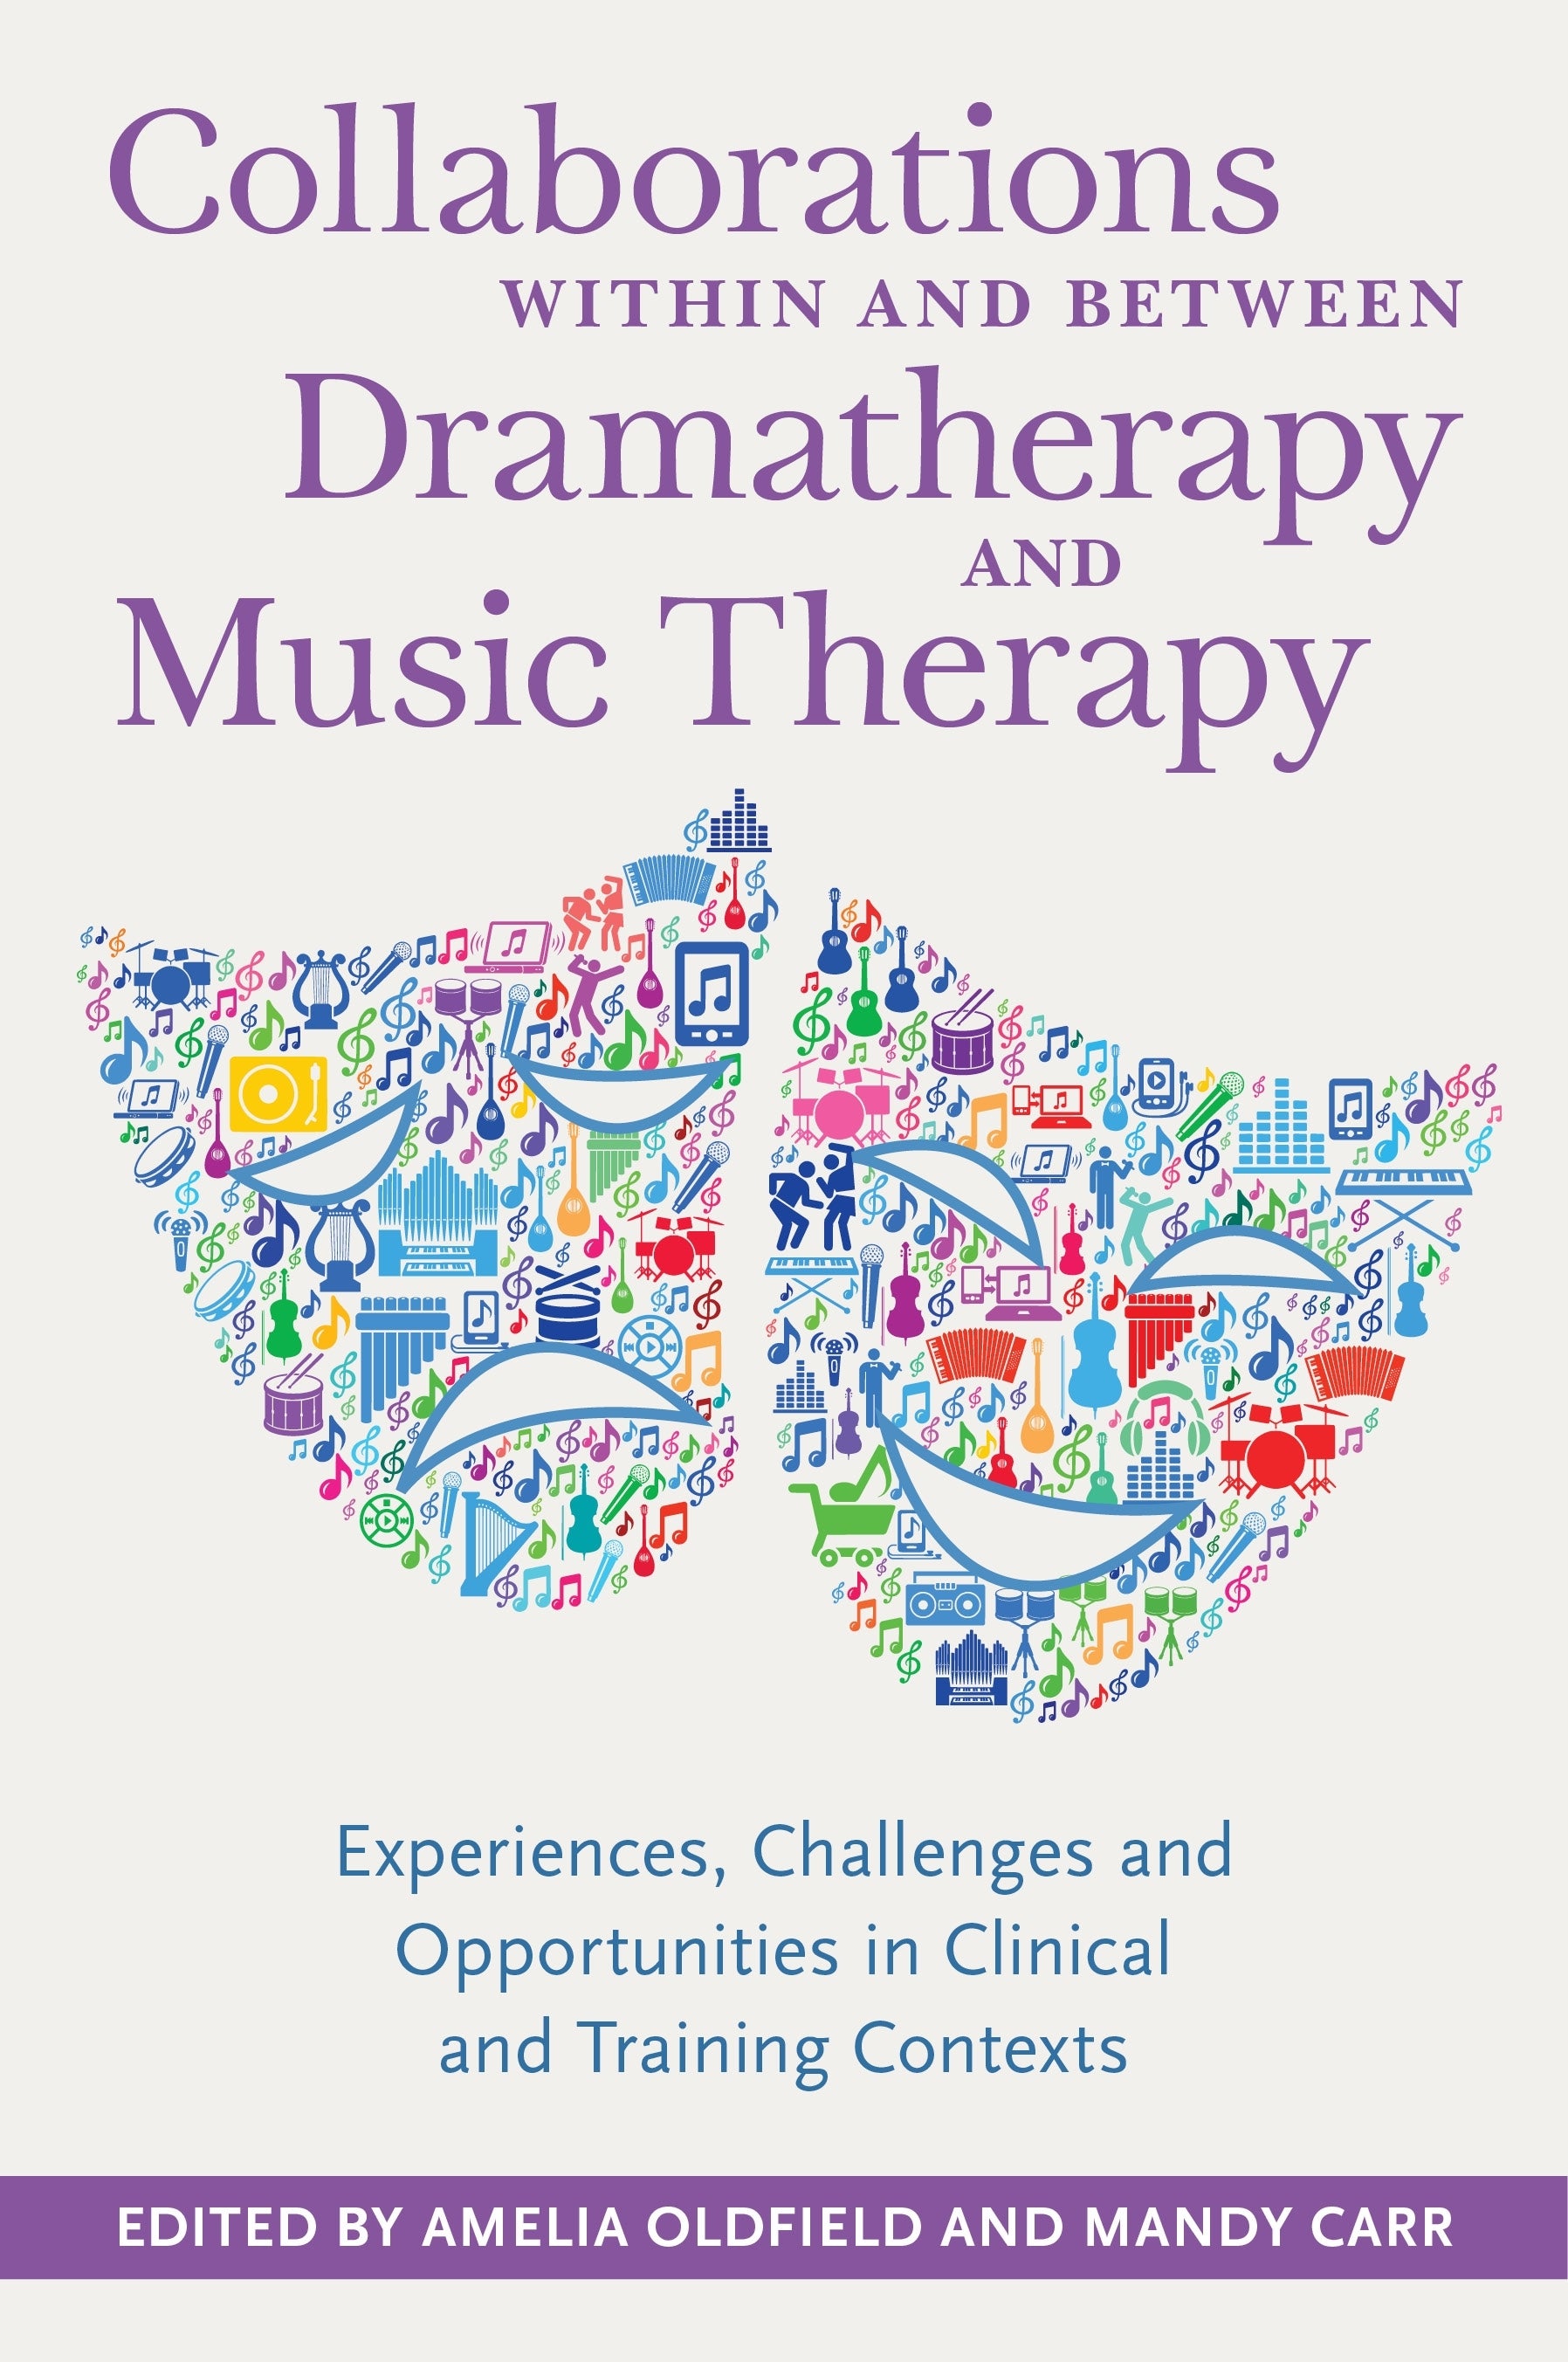 Collaborations Within and Between Dramatherapy and Music Therapy by Amelia Oldfield, Rebecca Applin Warner, Amanda Carr, No Author Listed